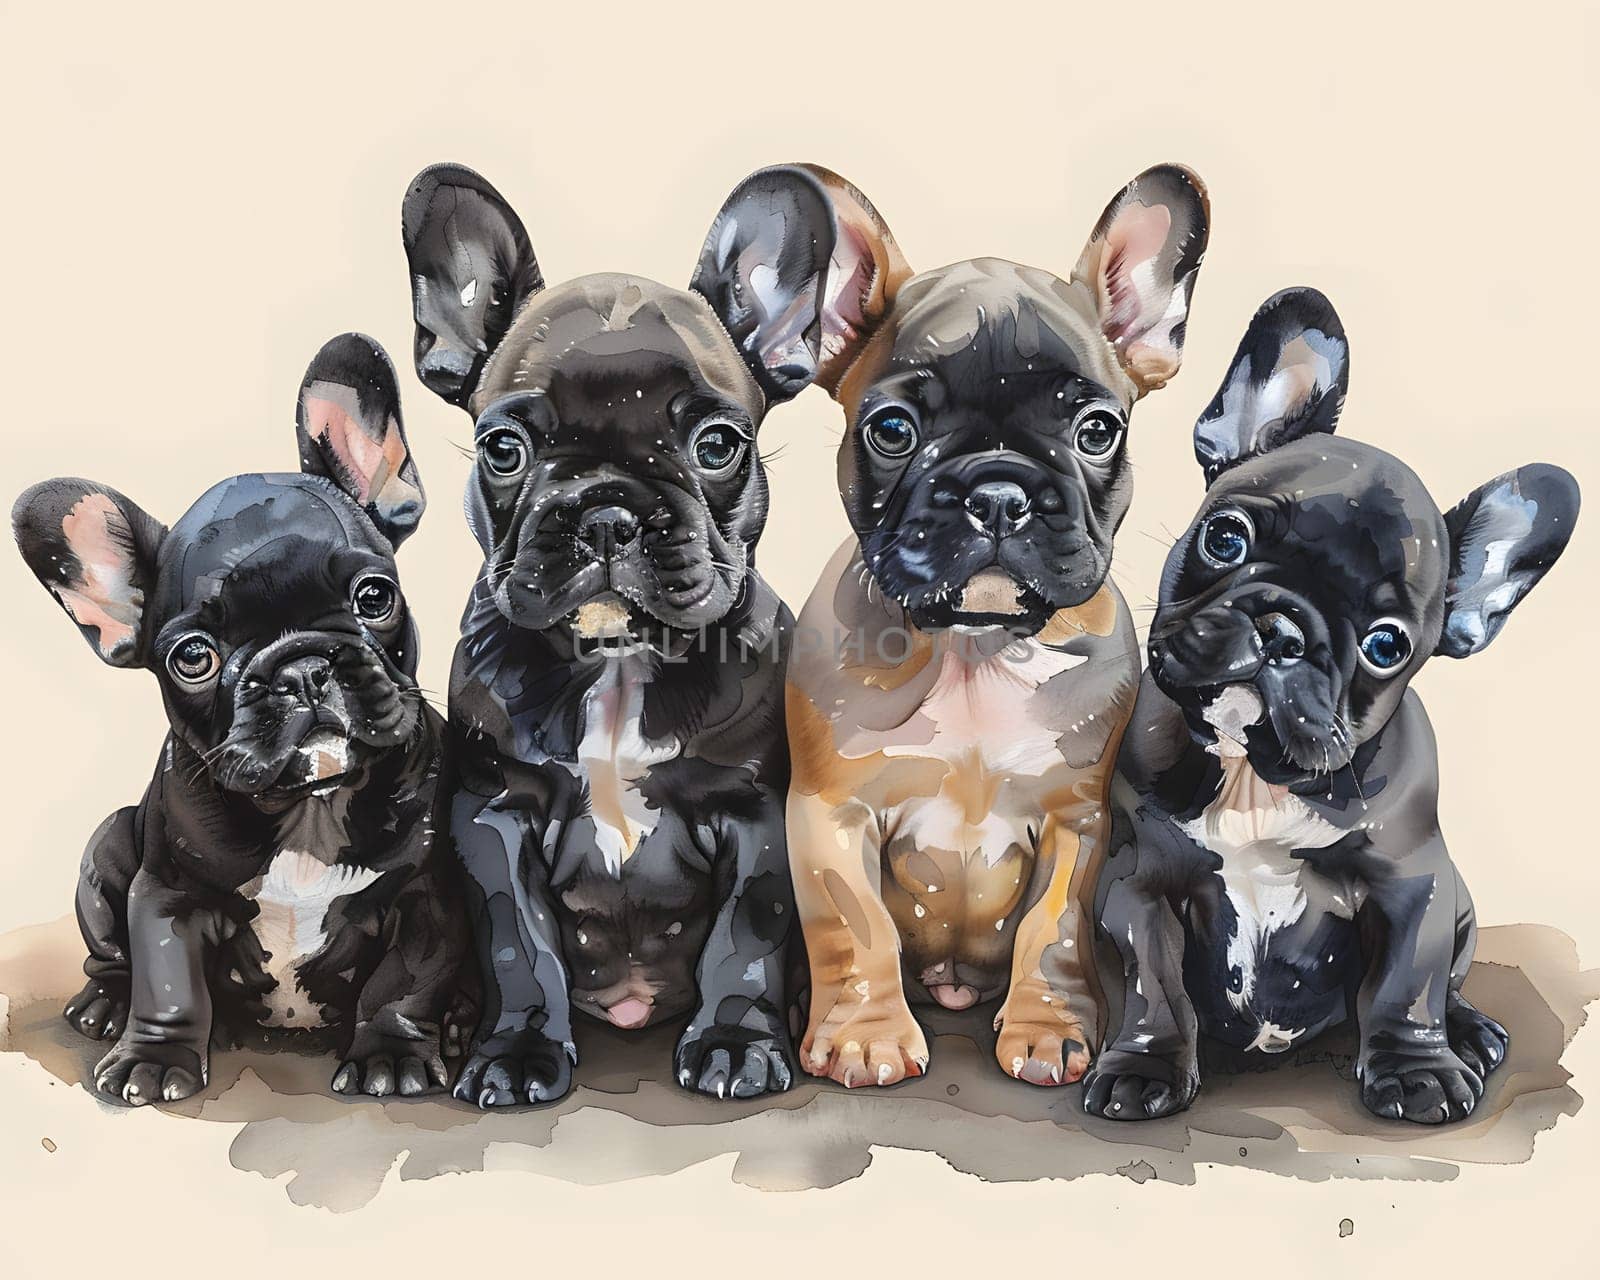 Four French bulldog puppies sitting together, fawn colored with cute snouts by Nadtochiy